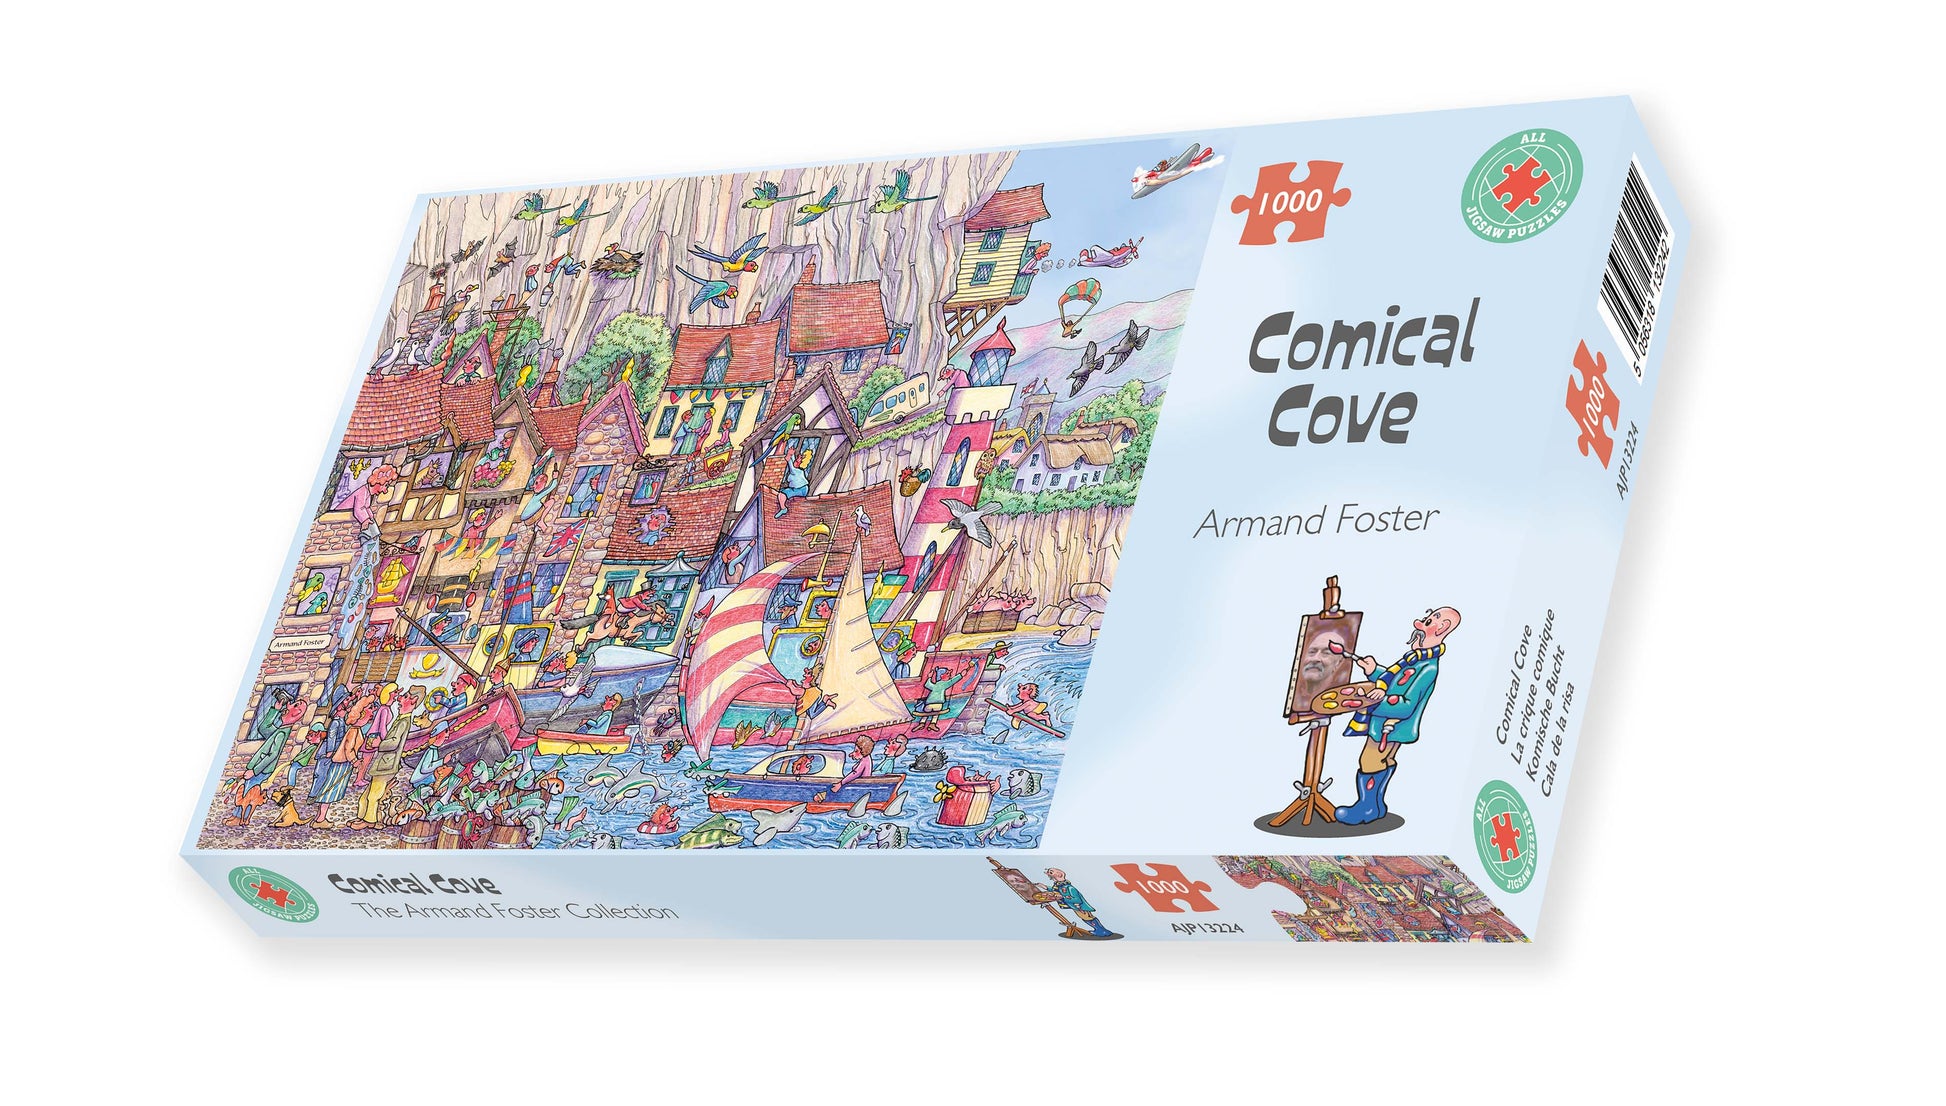 Comical Cove - Armand Foster 1000 Piece Jigsaw Puzzle box